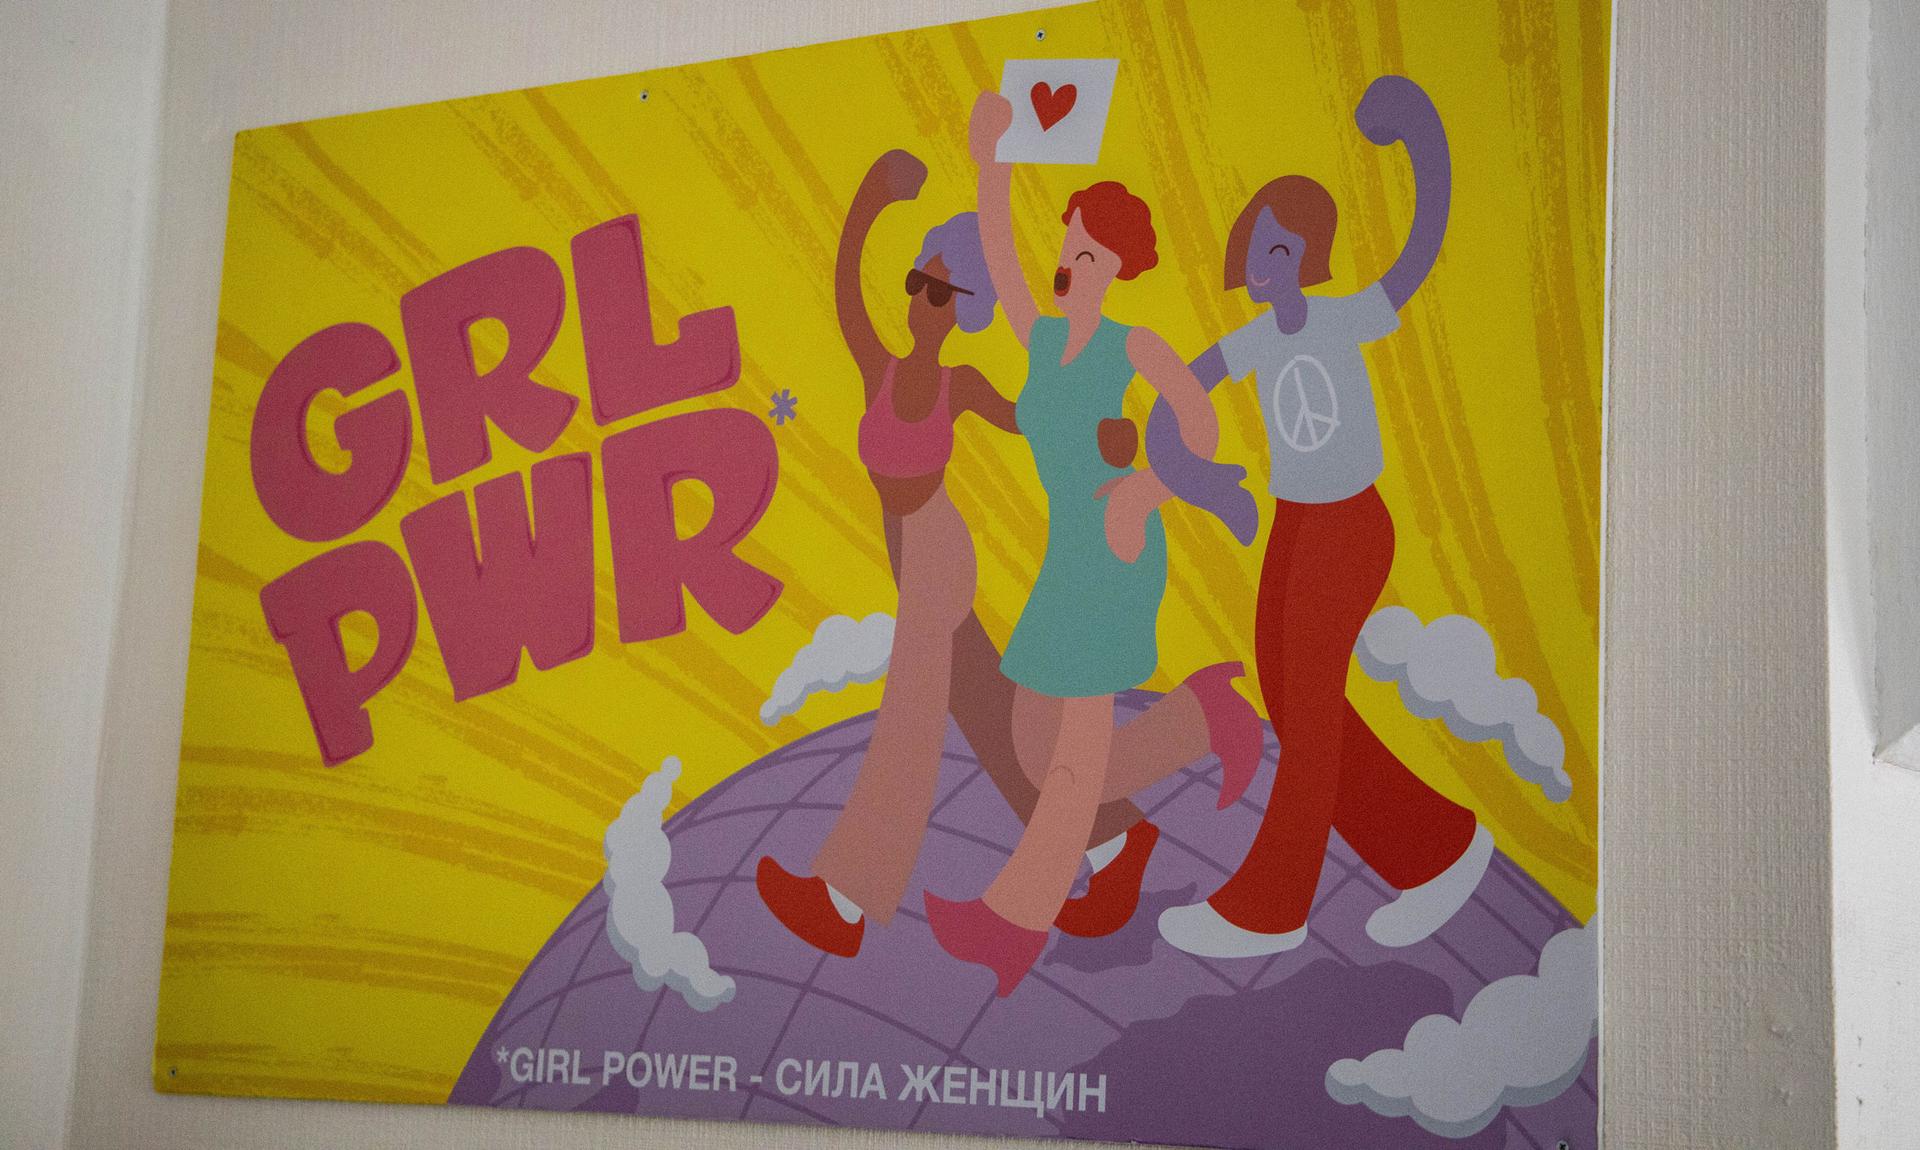 An illustrated poster shows three women linked arm in arm walking on a globe and it says GRL PWR.